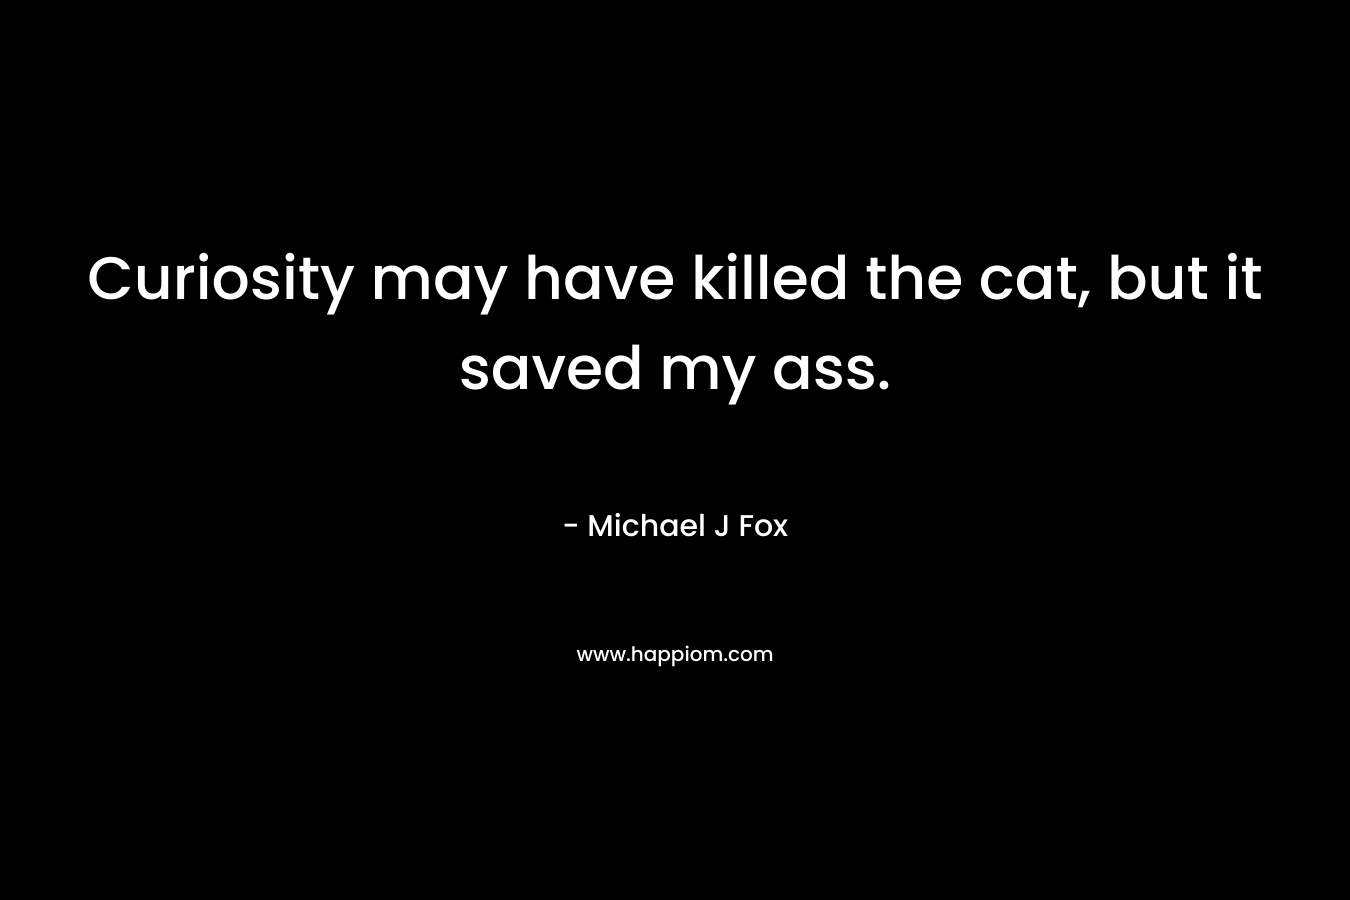 Curiosity may have killed the cat, but it saved my ass. – Michael J Fox